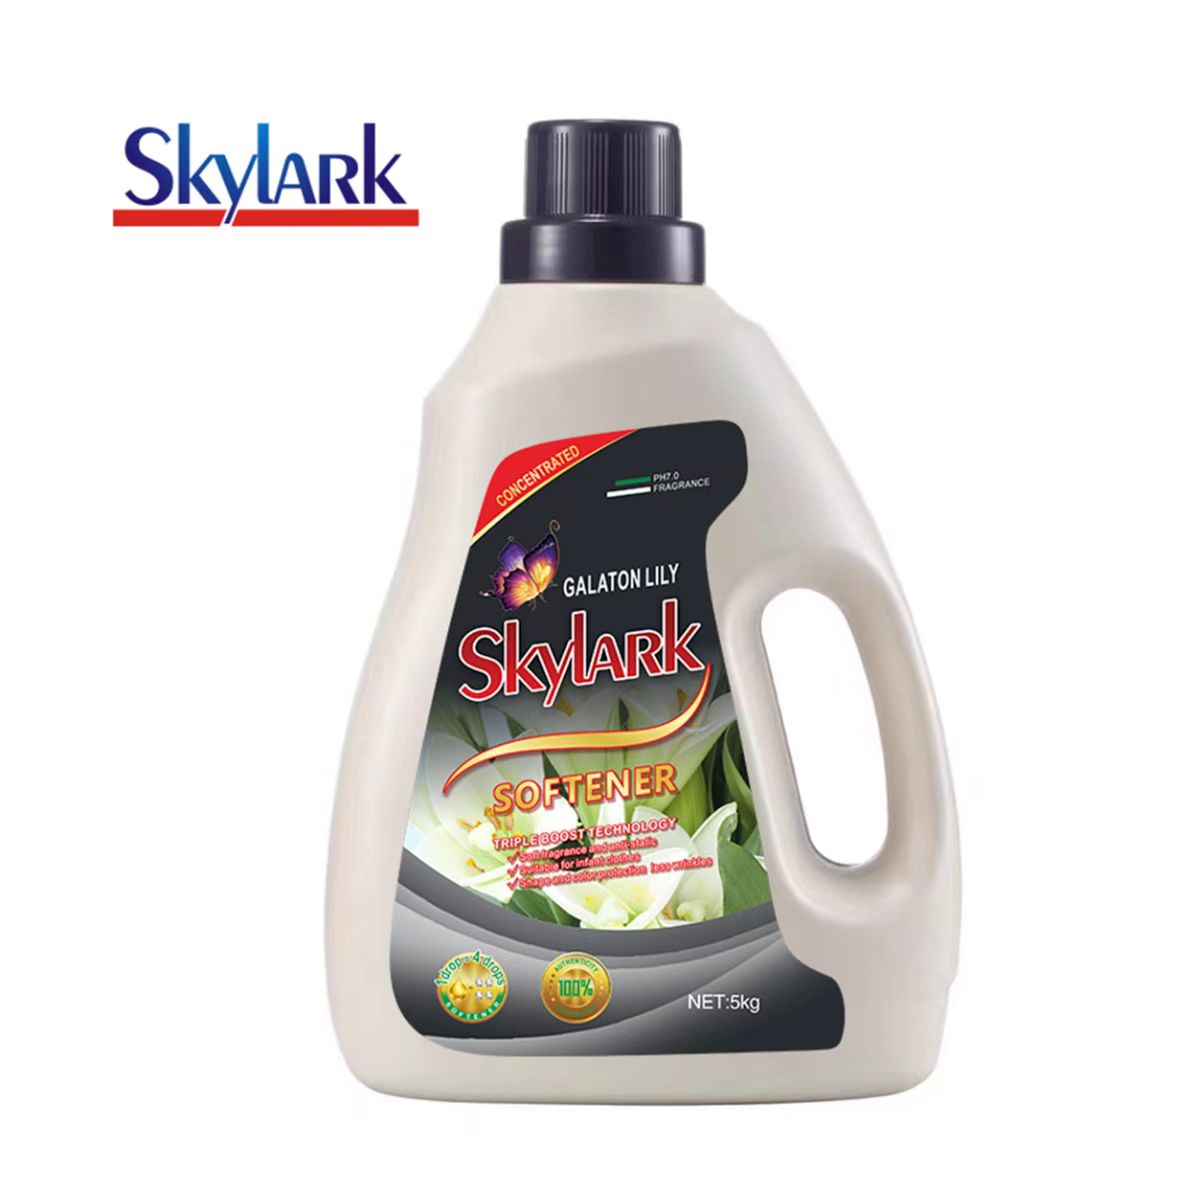 Super Galaton Lily Concentrated Type Fabric Softener With Excellent Performance Featured Image